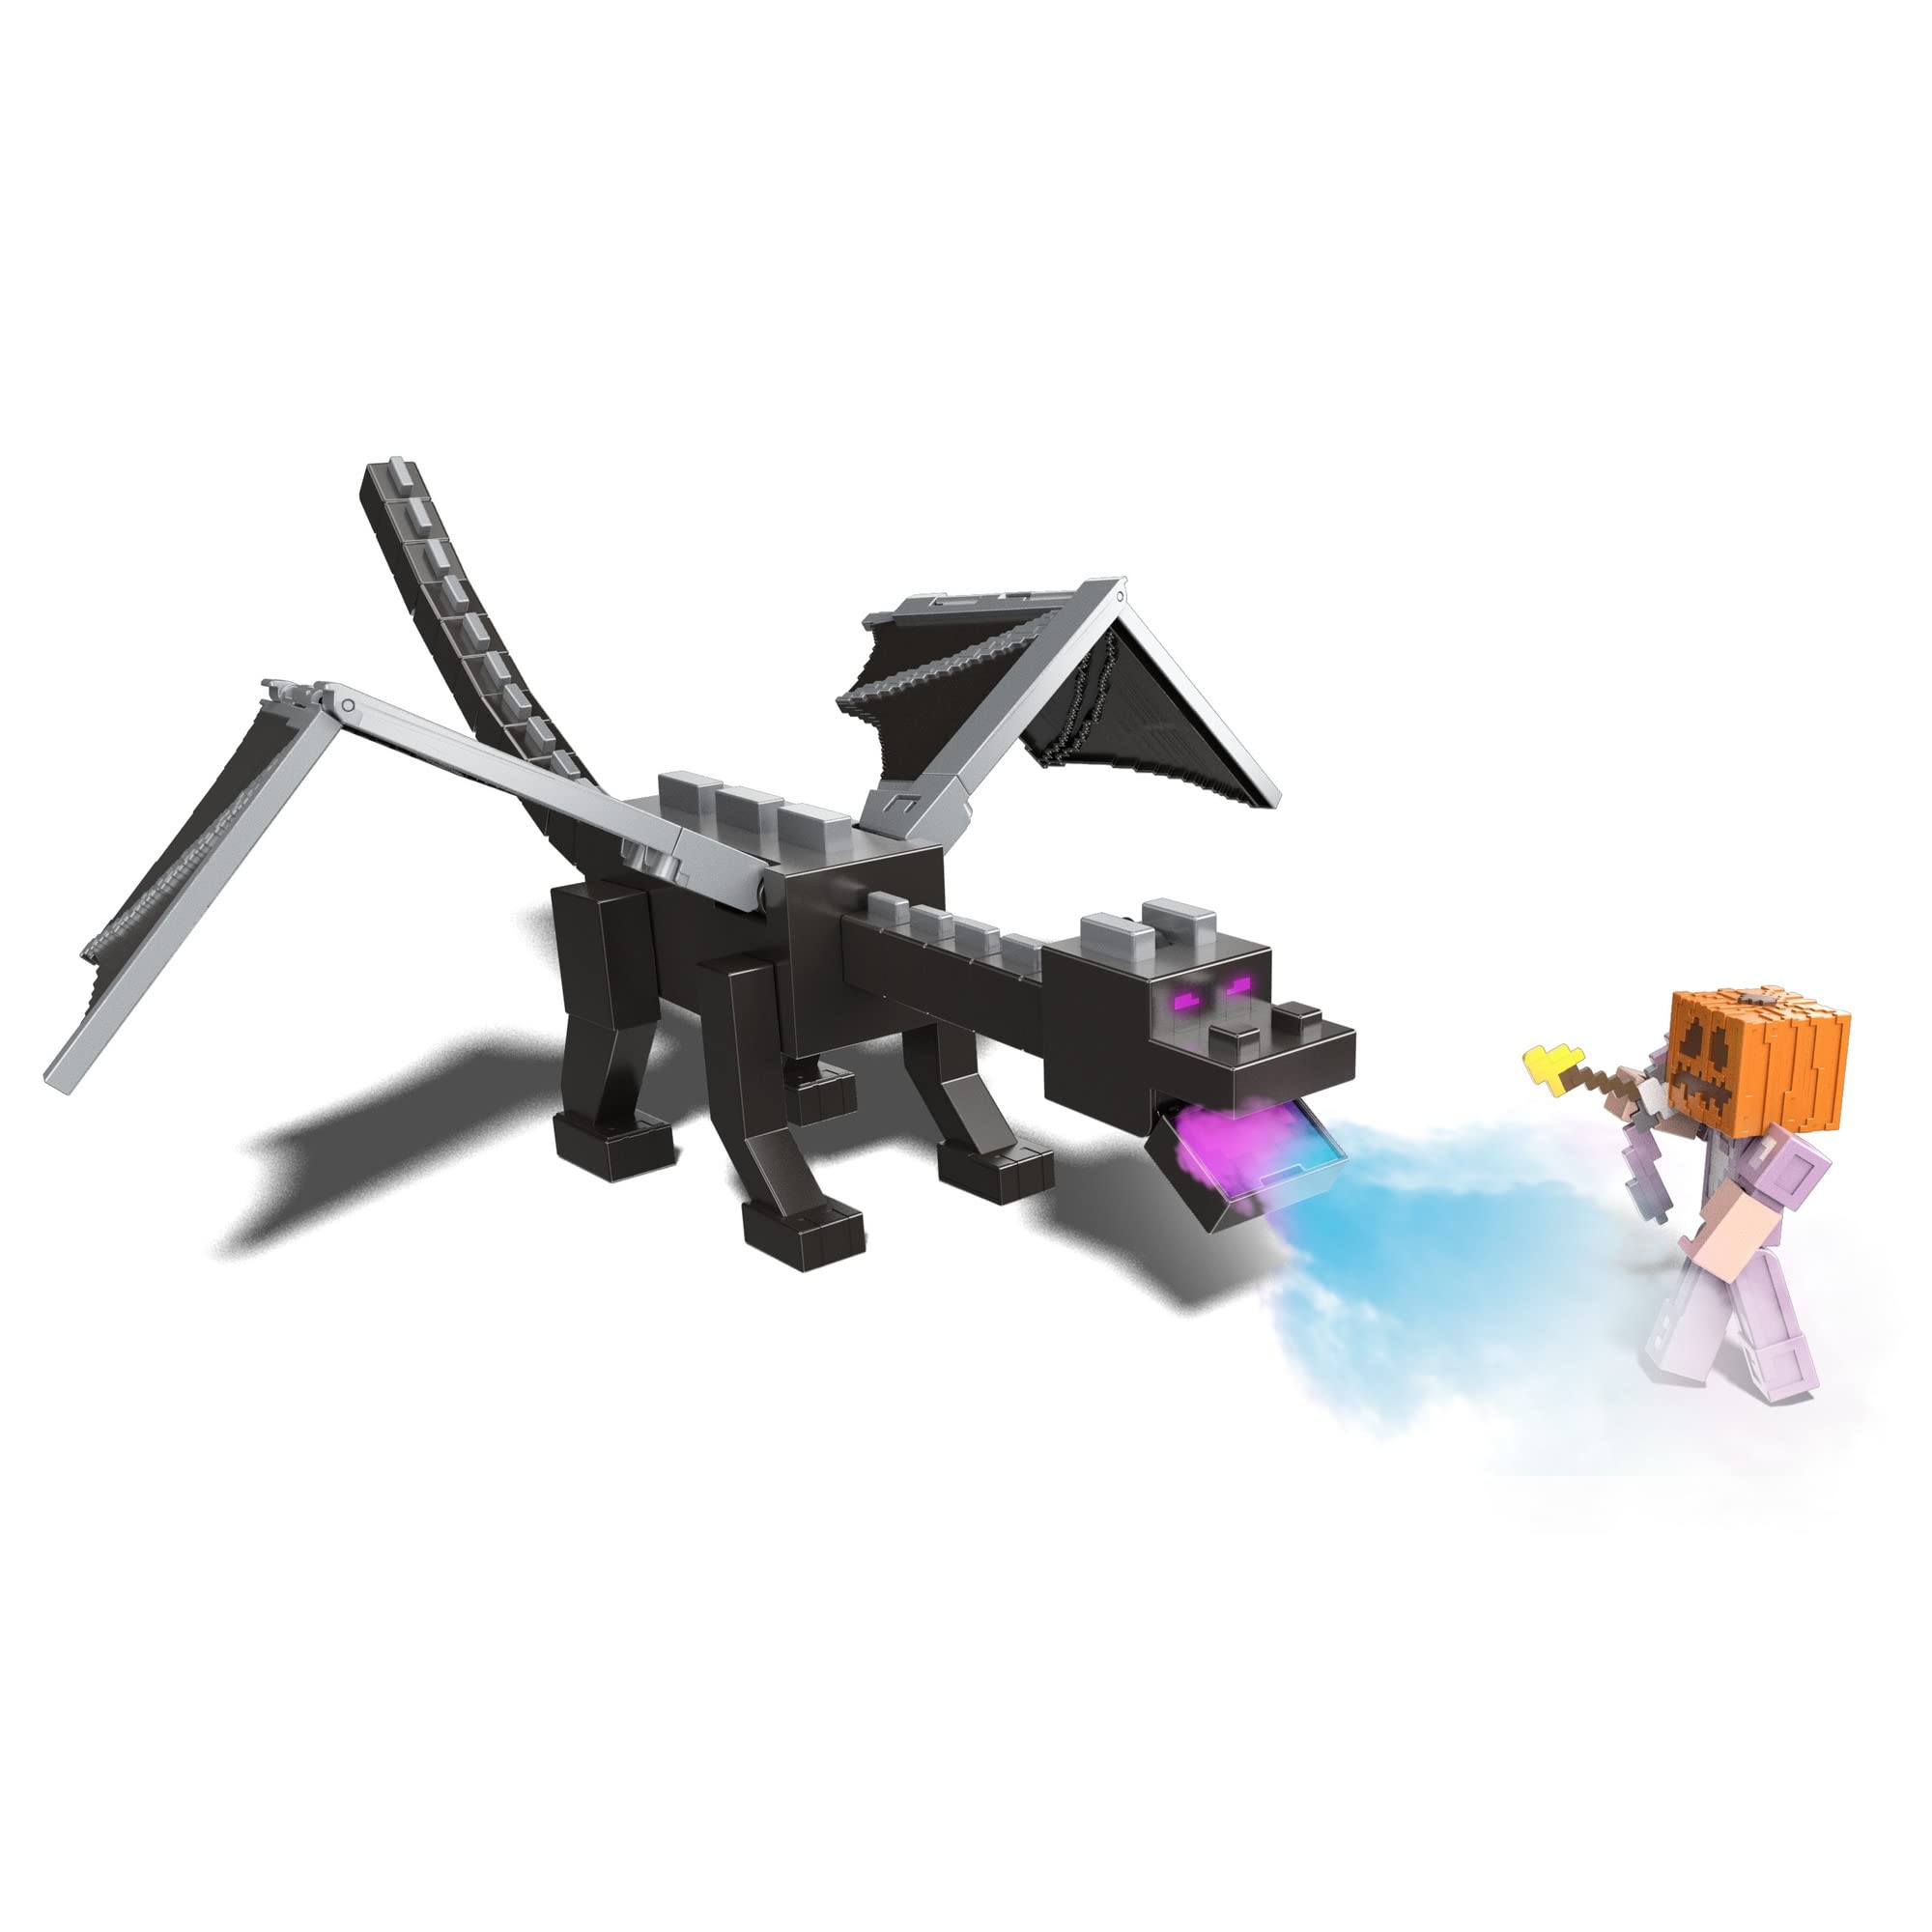  Mattel Minecraft Ultimate Ender Dragon Figure, 20-in  Mist-Breathing Creature, Plus 3.25-in Color-Change Steve Figure, Weapon,  Amor and Battle Accessory, Gift for 6 Years Old and Up : Musical Instruments